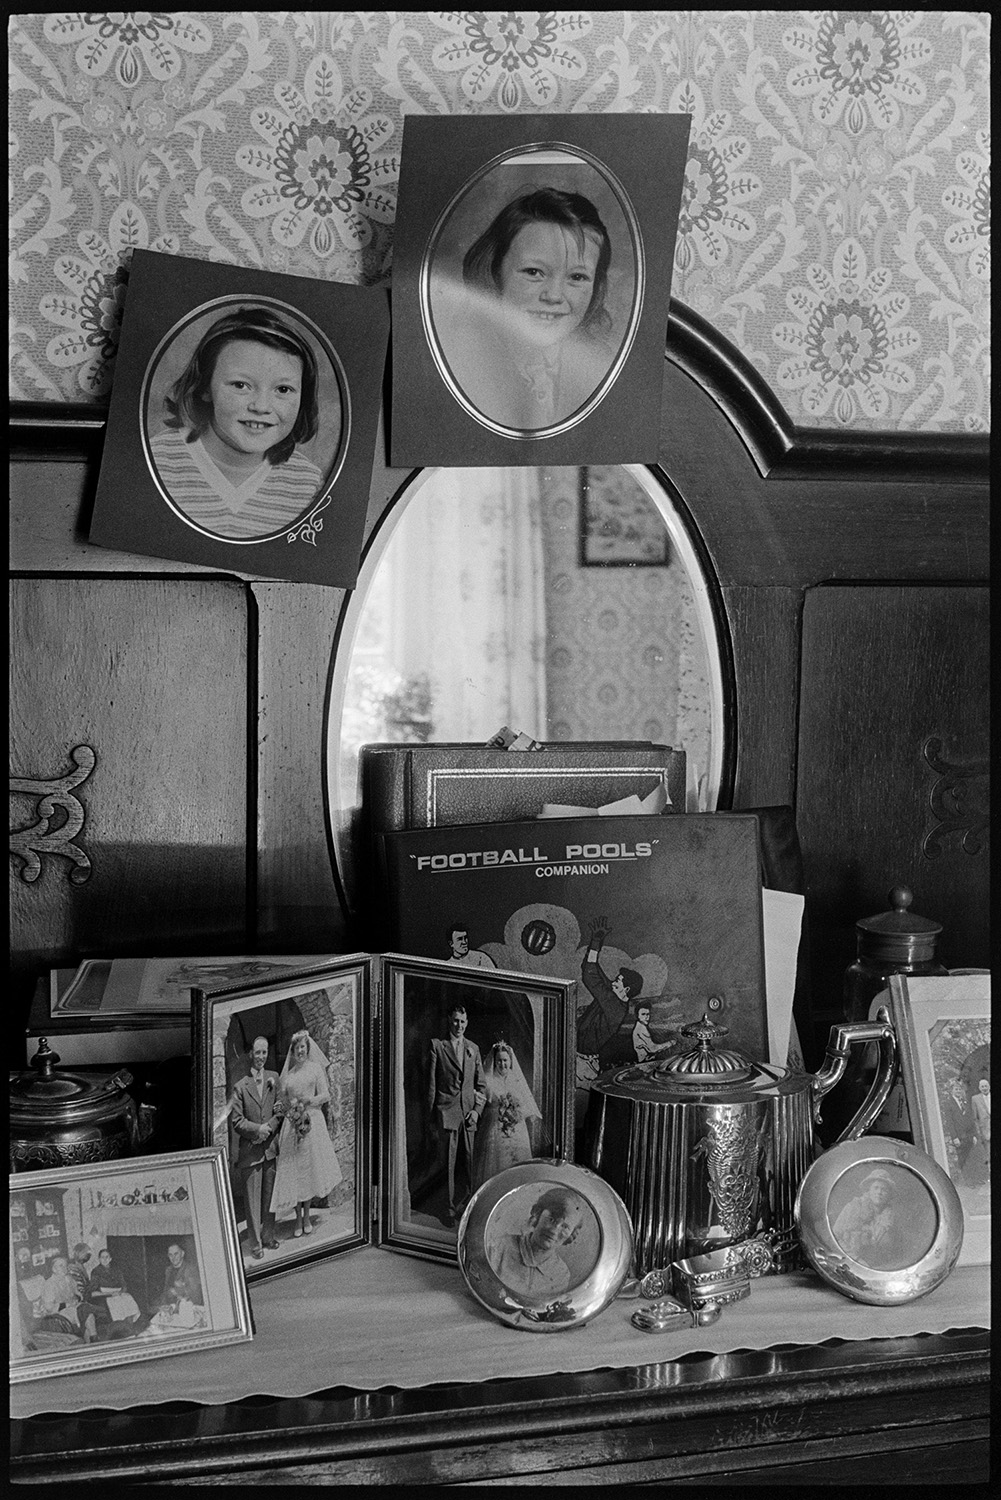 Side table with photographs and mirror. 
[A wooden side table in a house at Mariansleigh. Family photographs, a teapot and football pools folder are on display. A mirror is also set into the sideboard.]